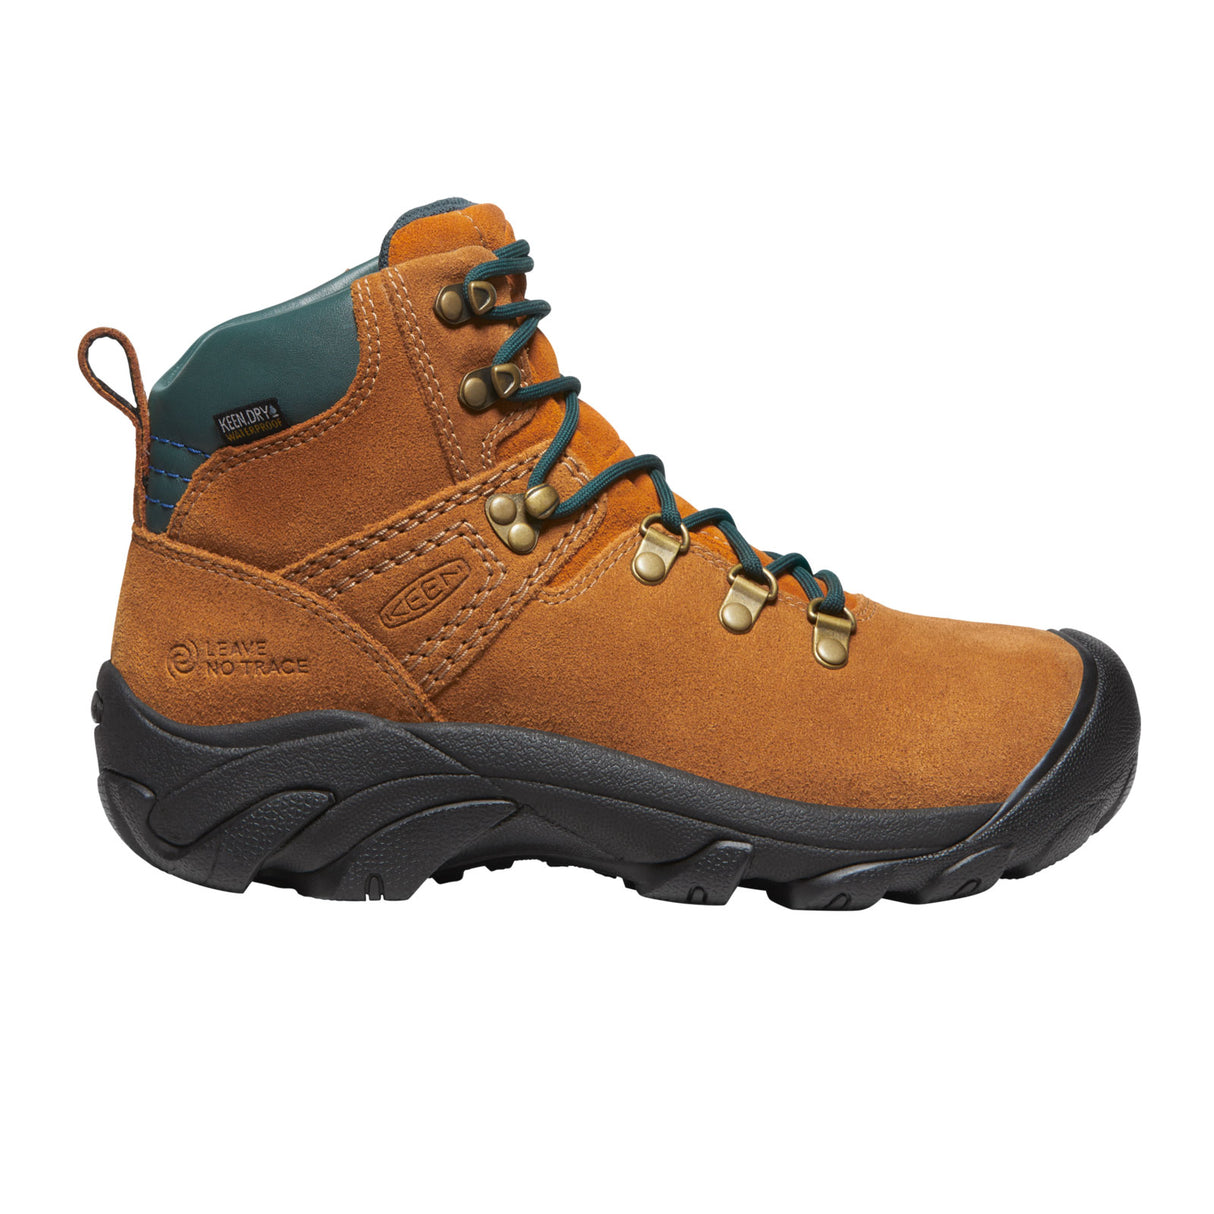 Keen Pyrenees Mid Hiking Boot (Women) - Maple/Marmalade Boots - Hiking - Mid - The Heel Shoe Fitters